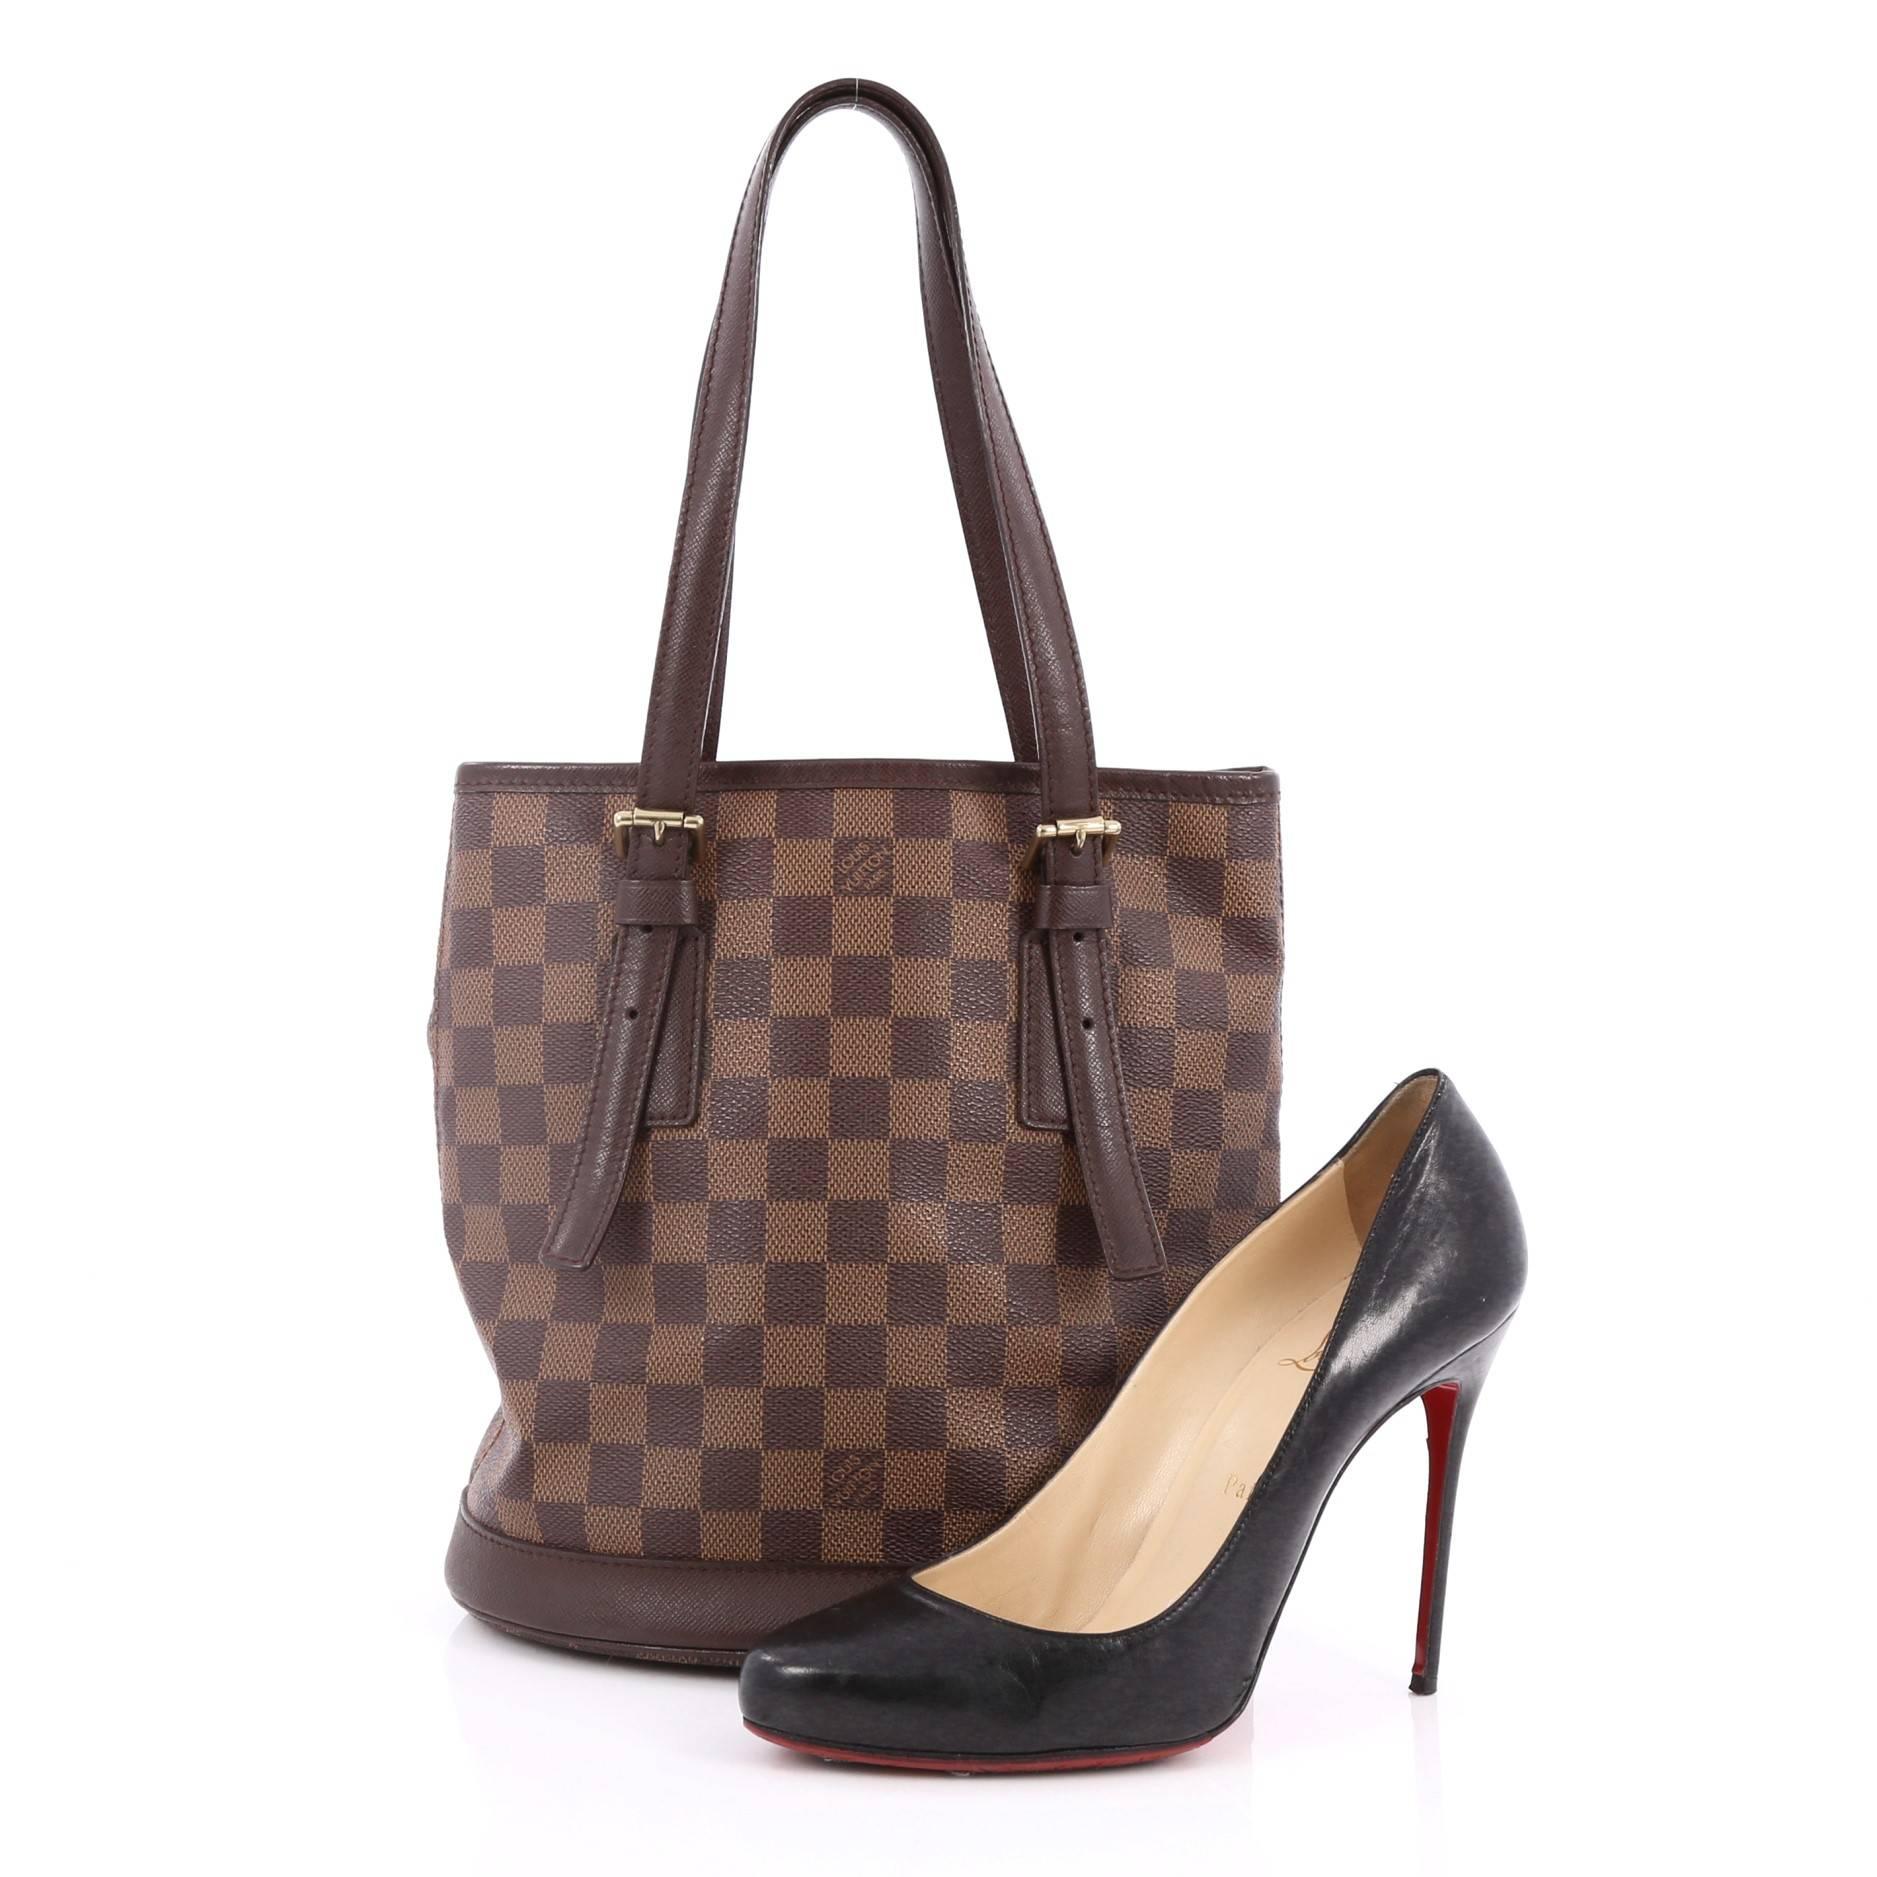 This authentic Louis Vuitton Marais Bucket Bag Damier is easy to transform from season to season. Crafted in damier ebene canvas, this simple and chic bucket bag features adjustable shoulder straps, protective base studs and gold-tone hardware